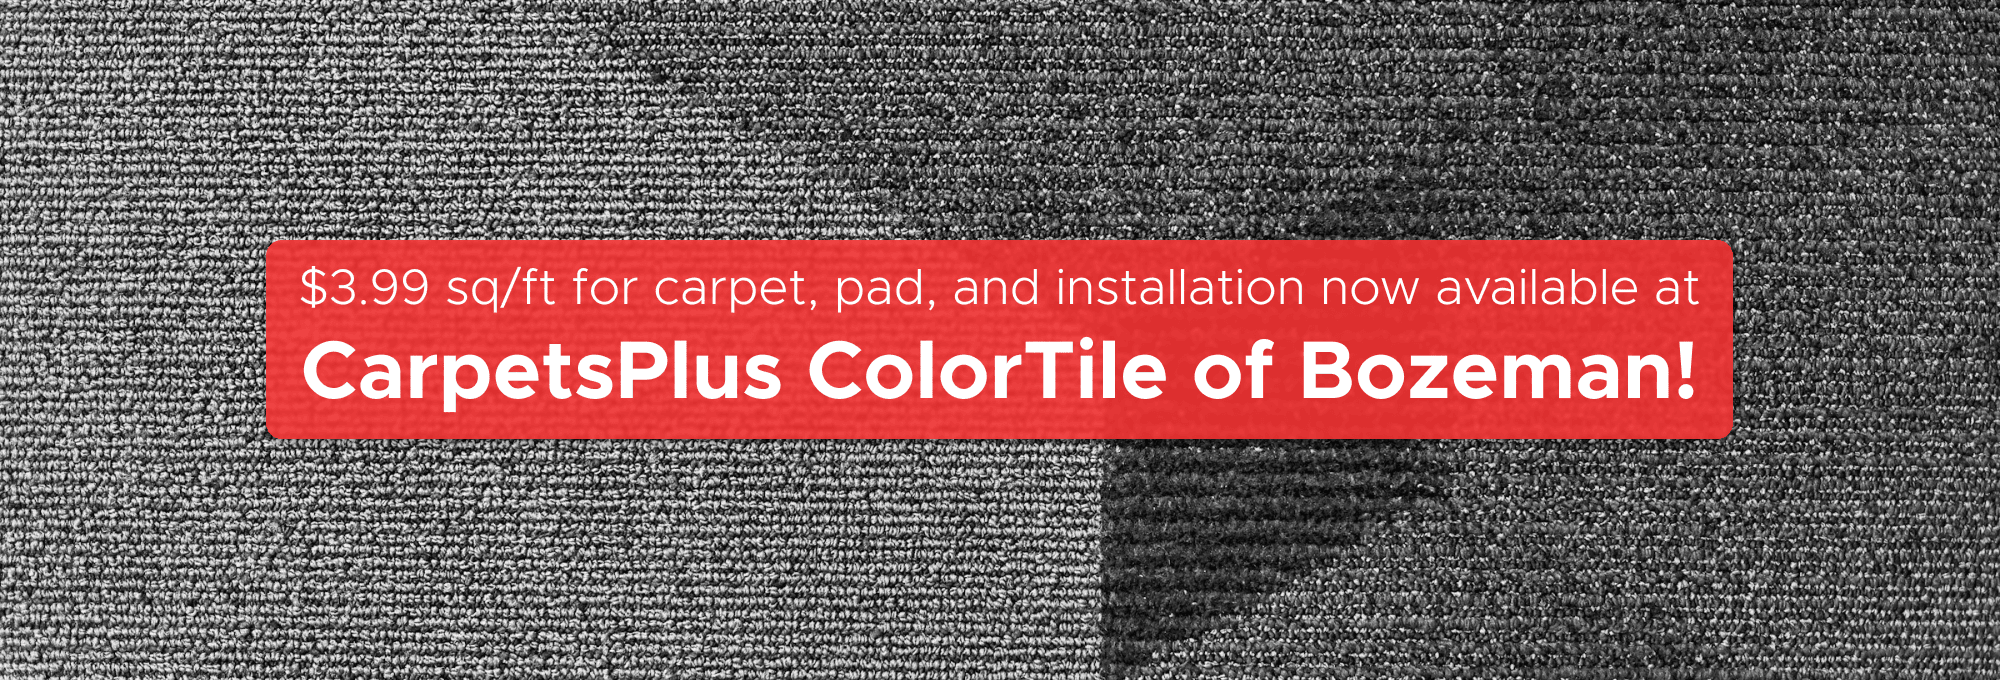 $3.99 sq/ft for carpet, pad, and installation now available at CarpetsPlus of Bozeman!